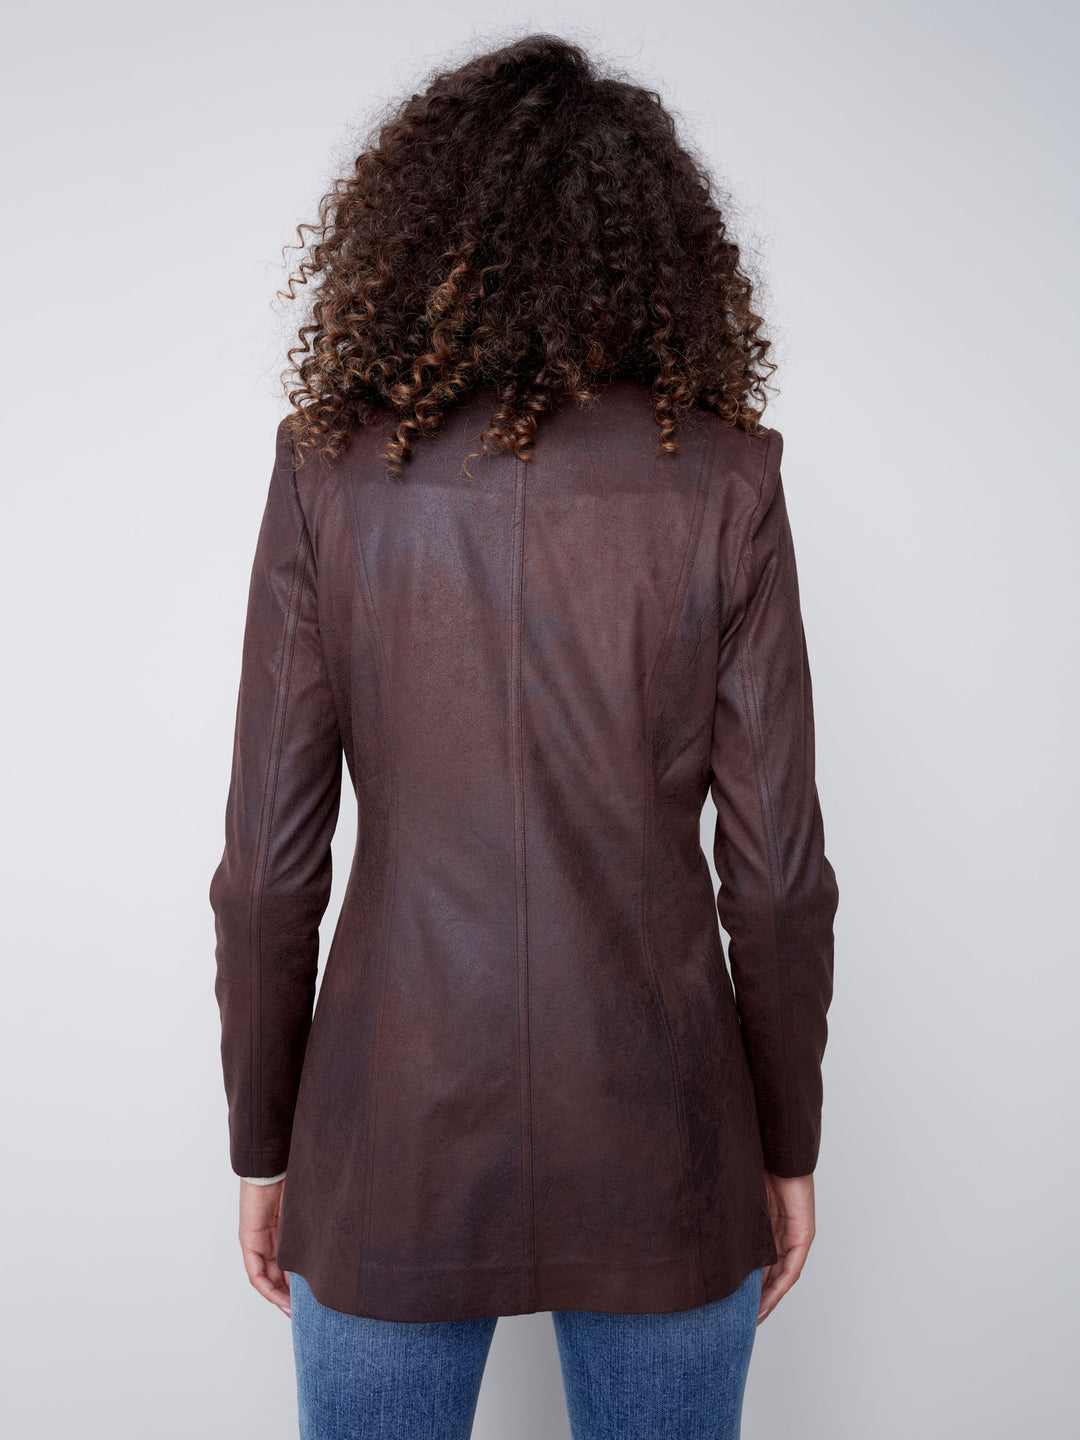 Charlie B Long Faux Suede Jacket With Zipper